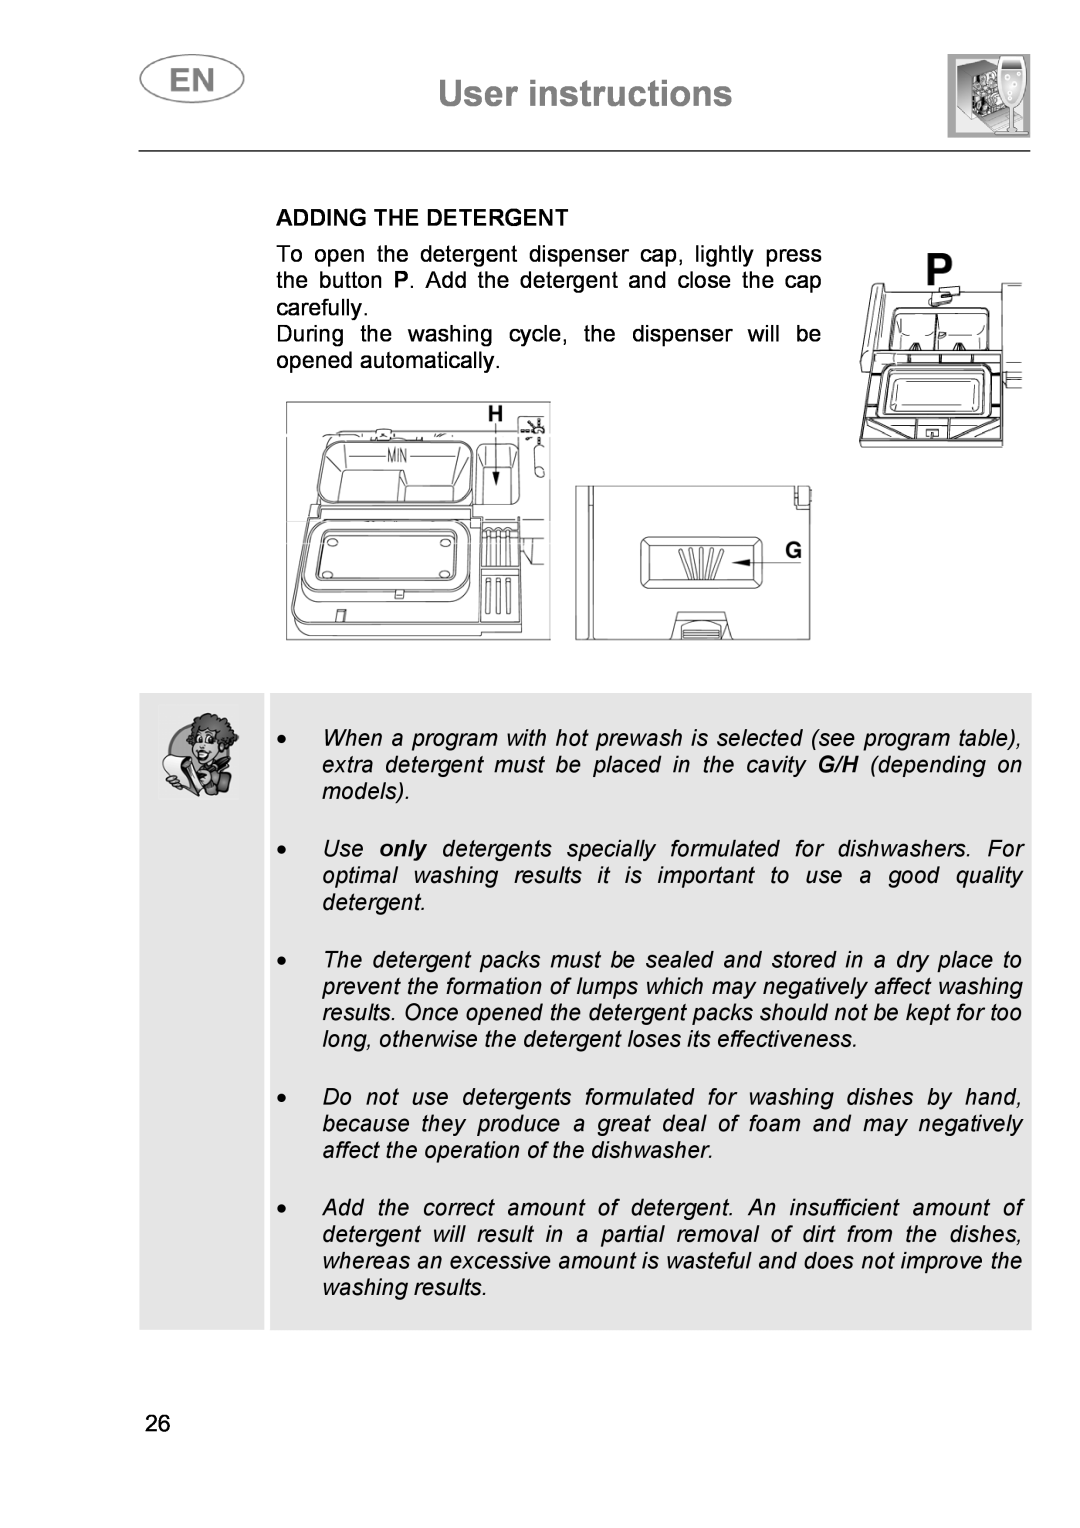 Smeg DI614H User instructions, Adding The Detergent, During the washing cycle, the dispenser will be opened automatically 